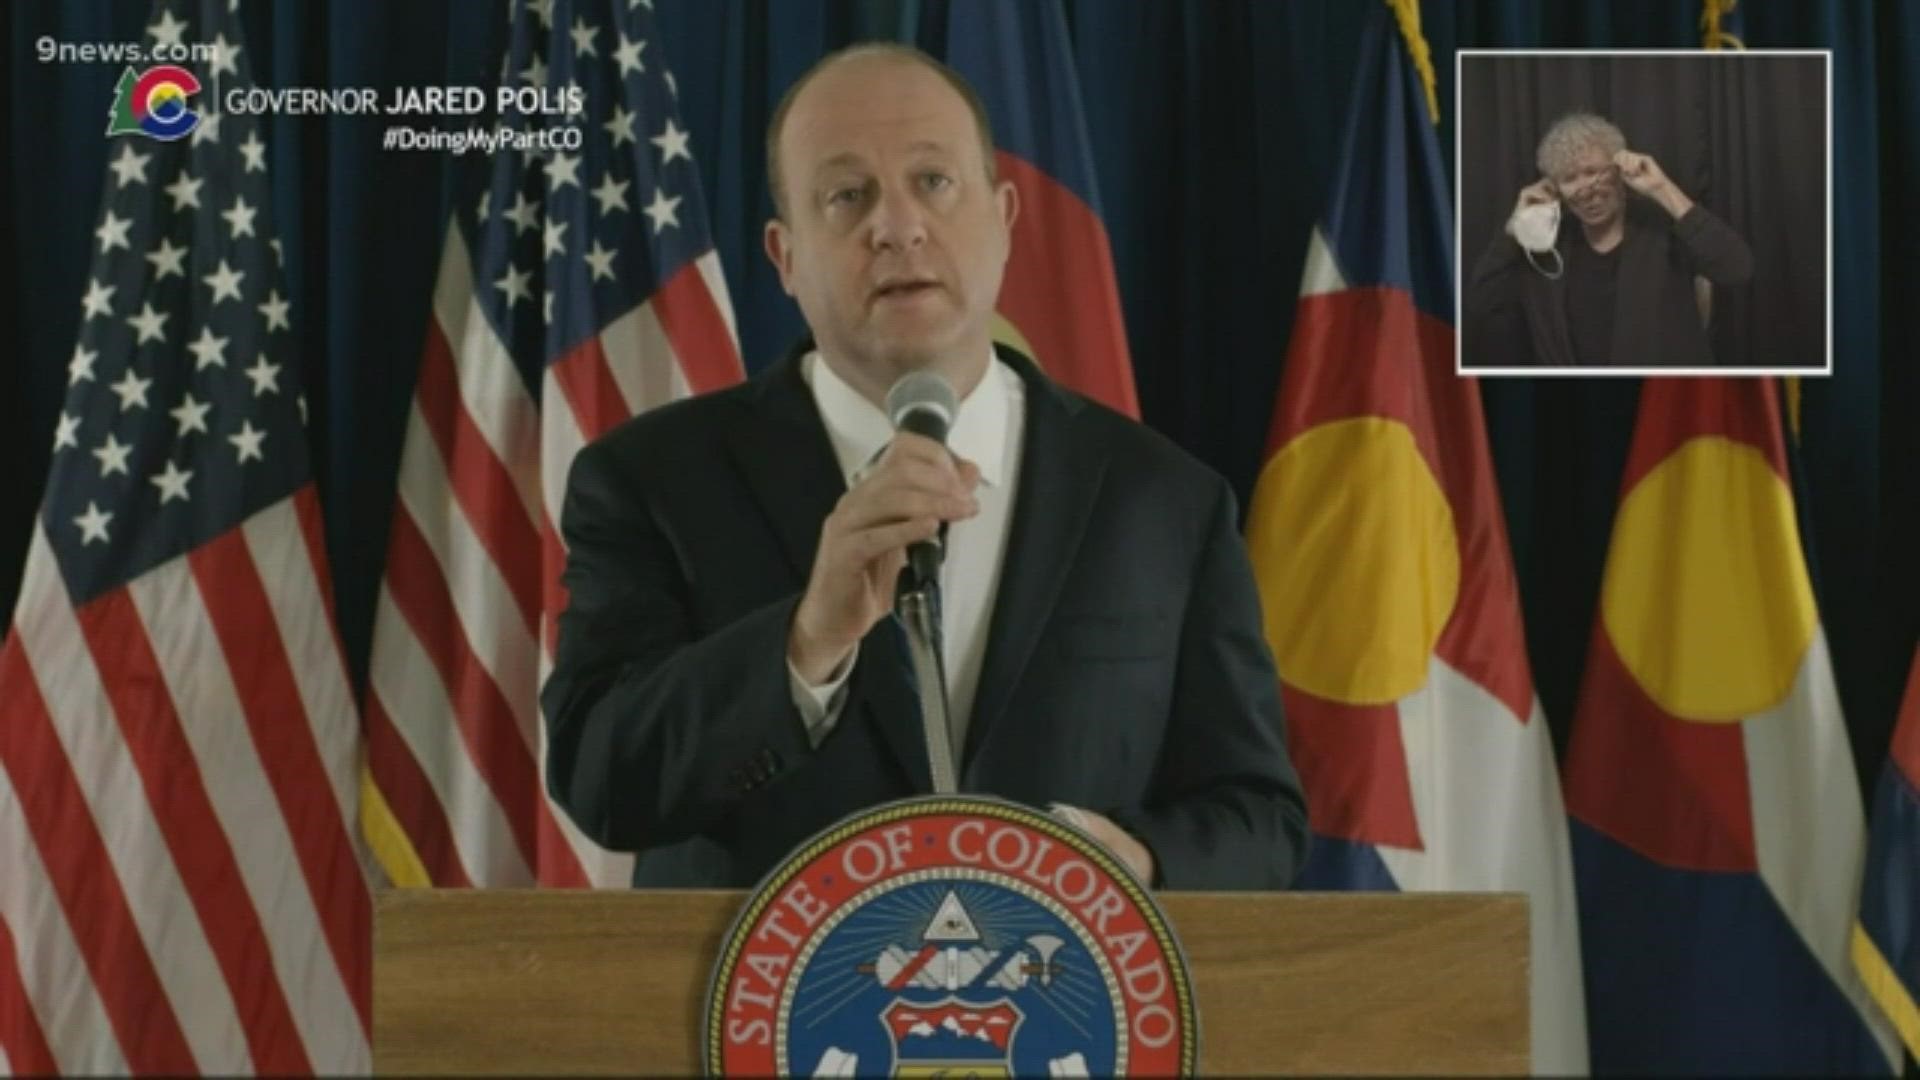 Governor Jared Polis provided an update on Colorado's COVID-19 during a news conference on Thursday, June 18.